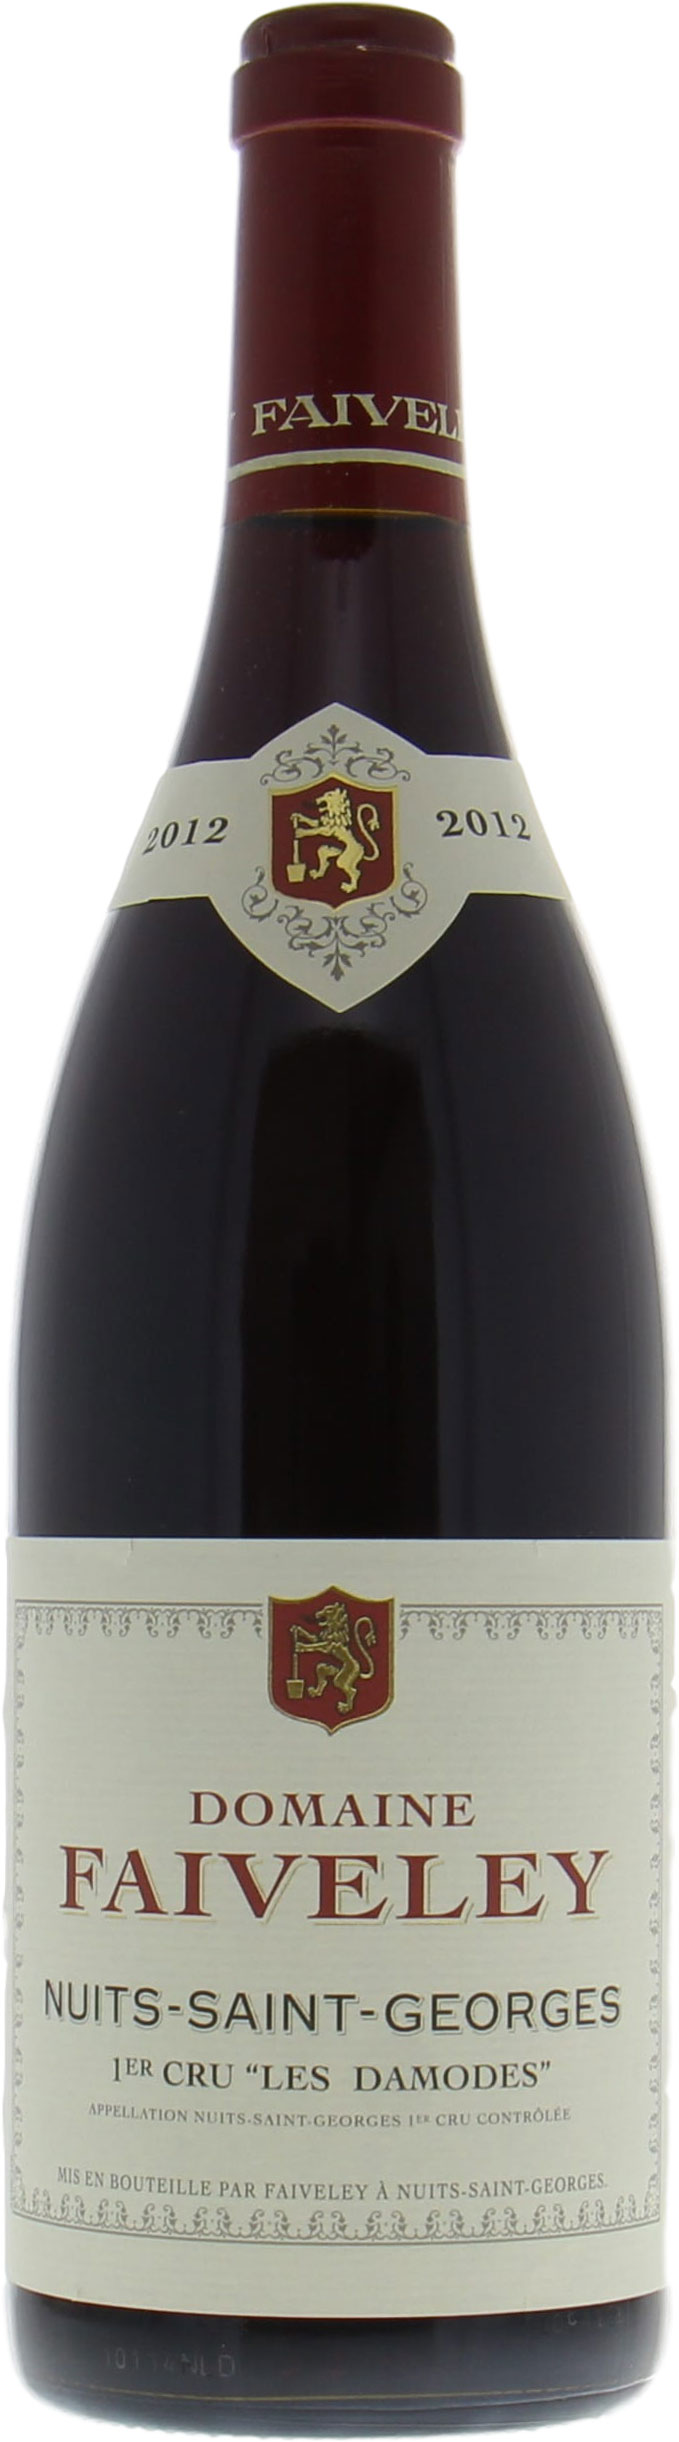 Faiveley - Nuits-St.-Georges Les Damodes 2012